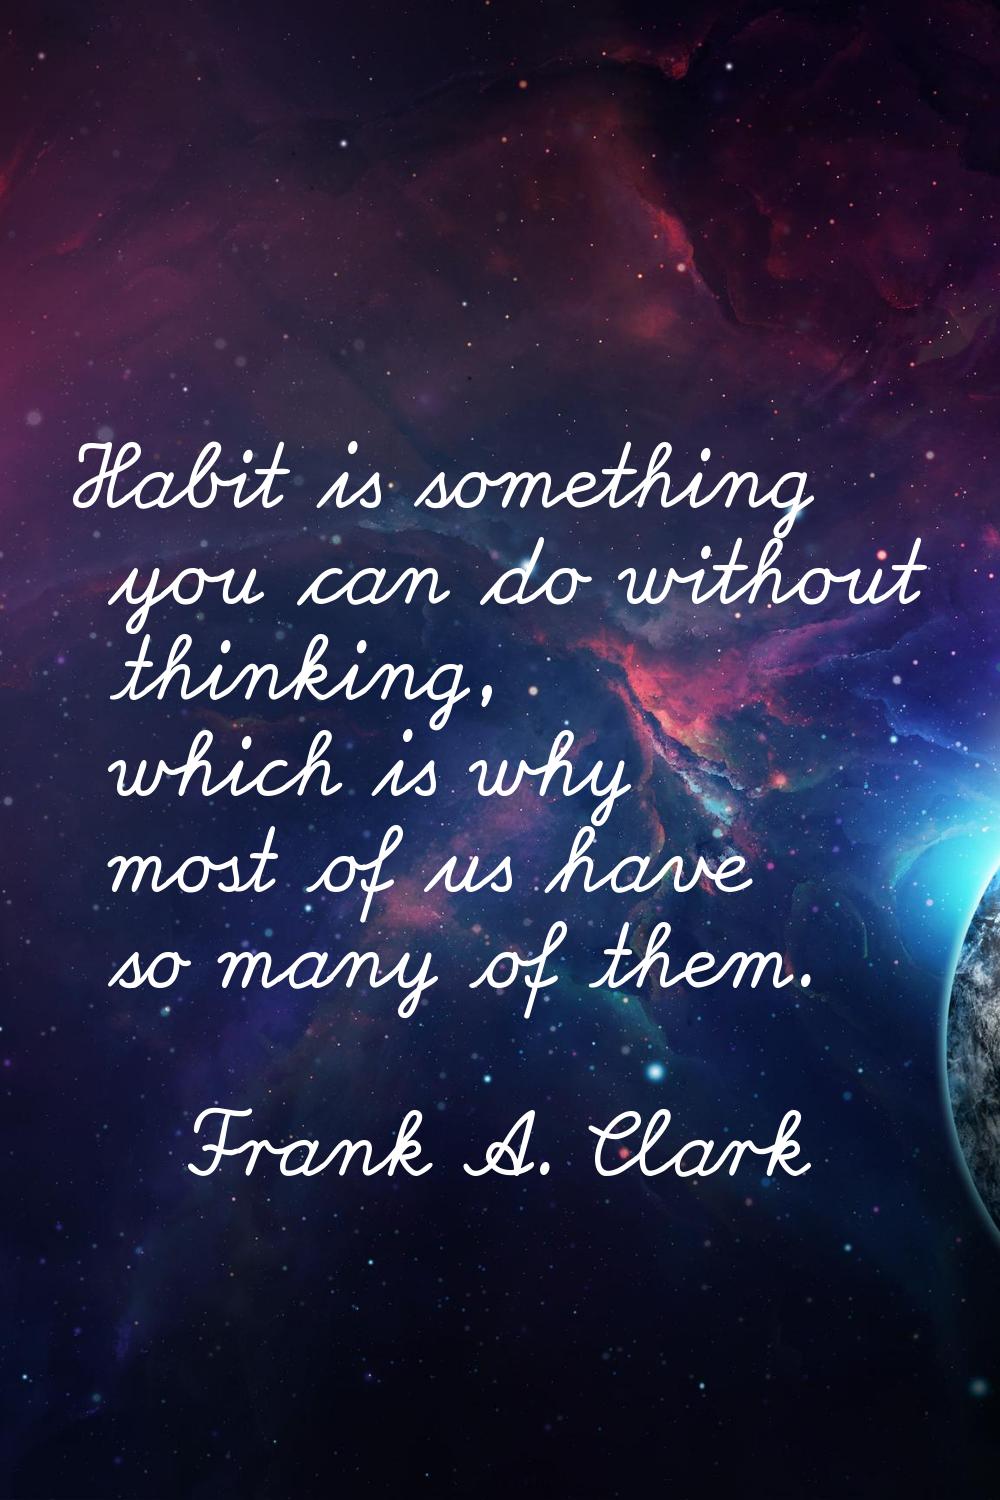 Habit is something you can do without thinking, which is why most of us have so many of them.